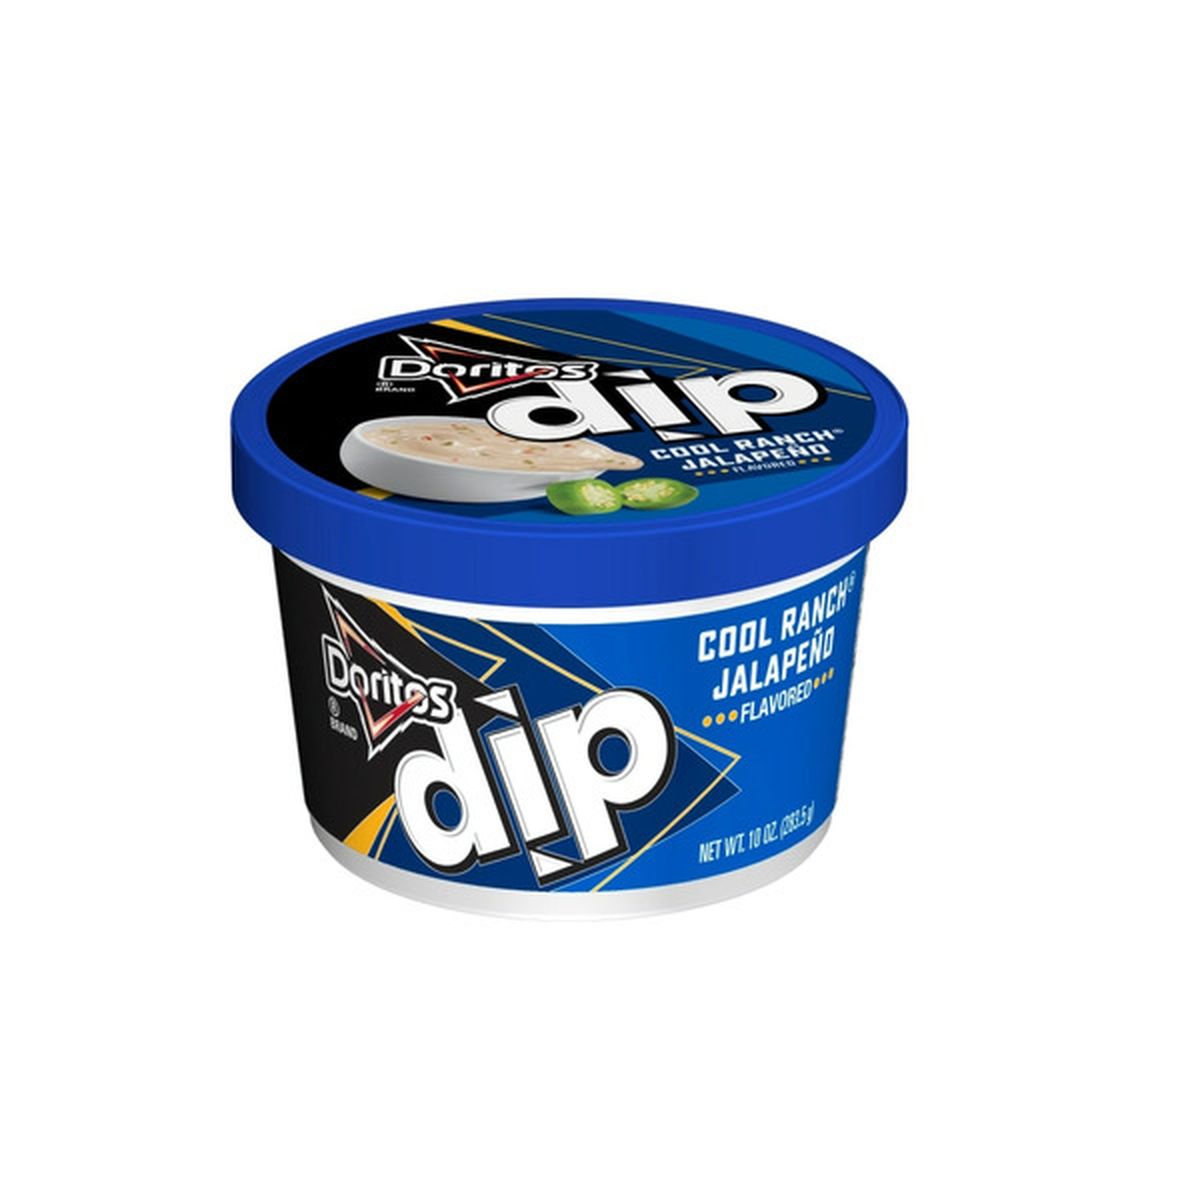 Doritos Dip, Cool Ranch Jalapeno Flavored (10 oz) Delivery or Pickup Near  Me - Instacart